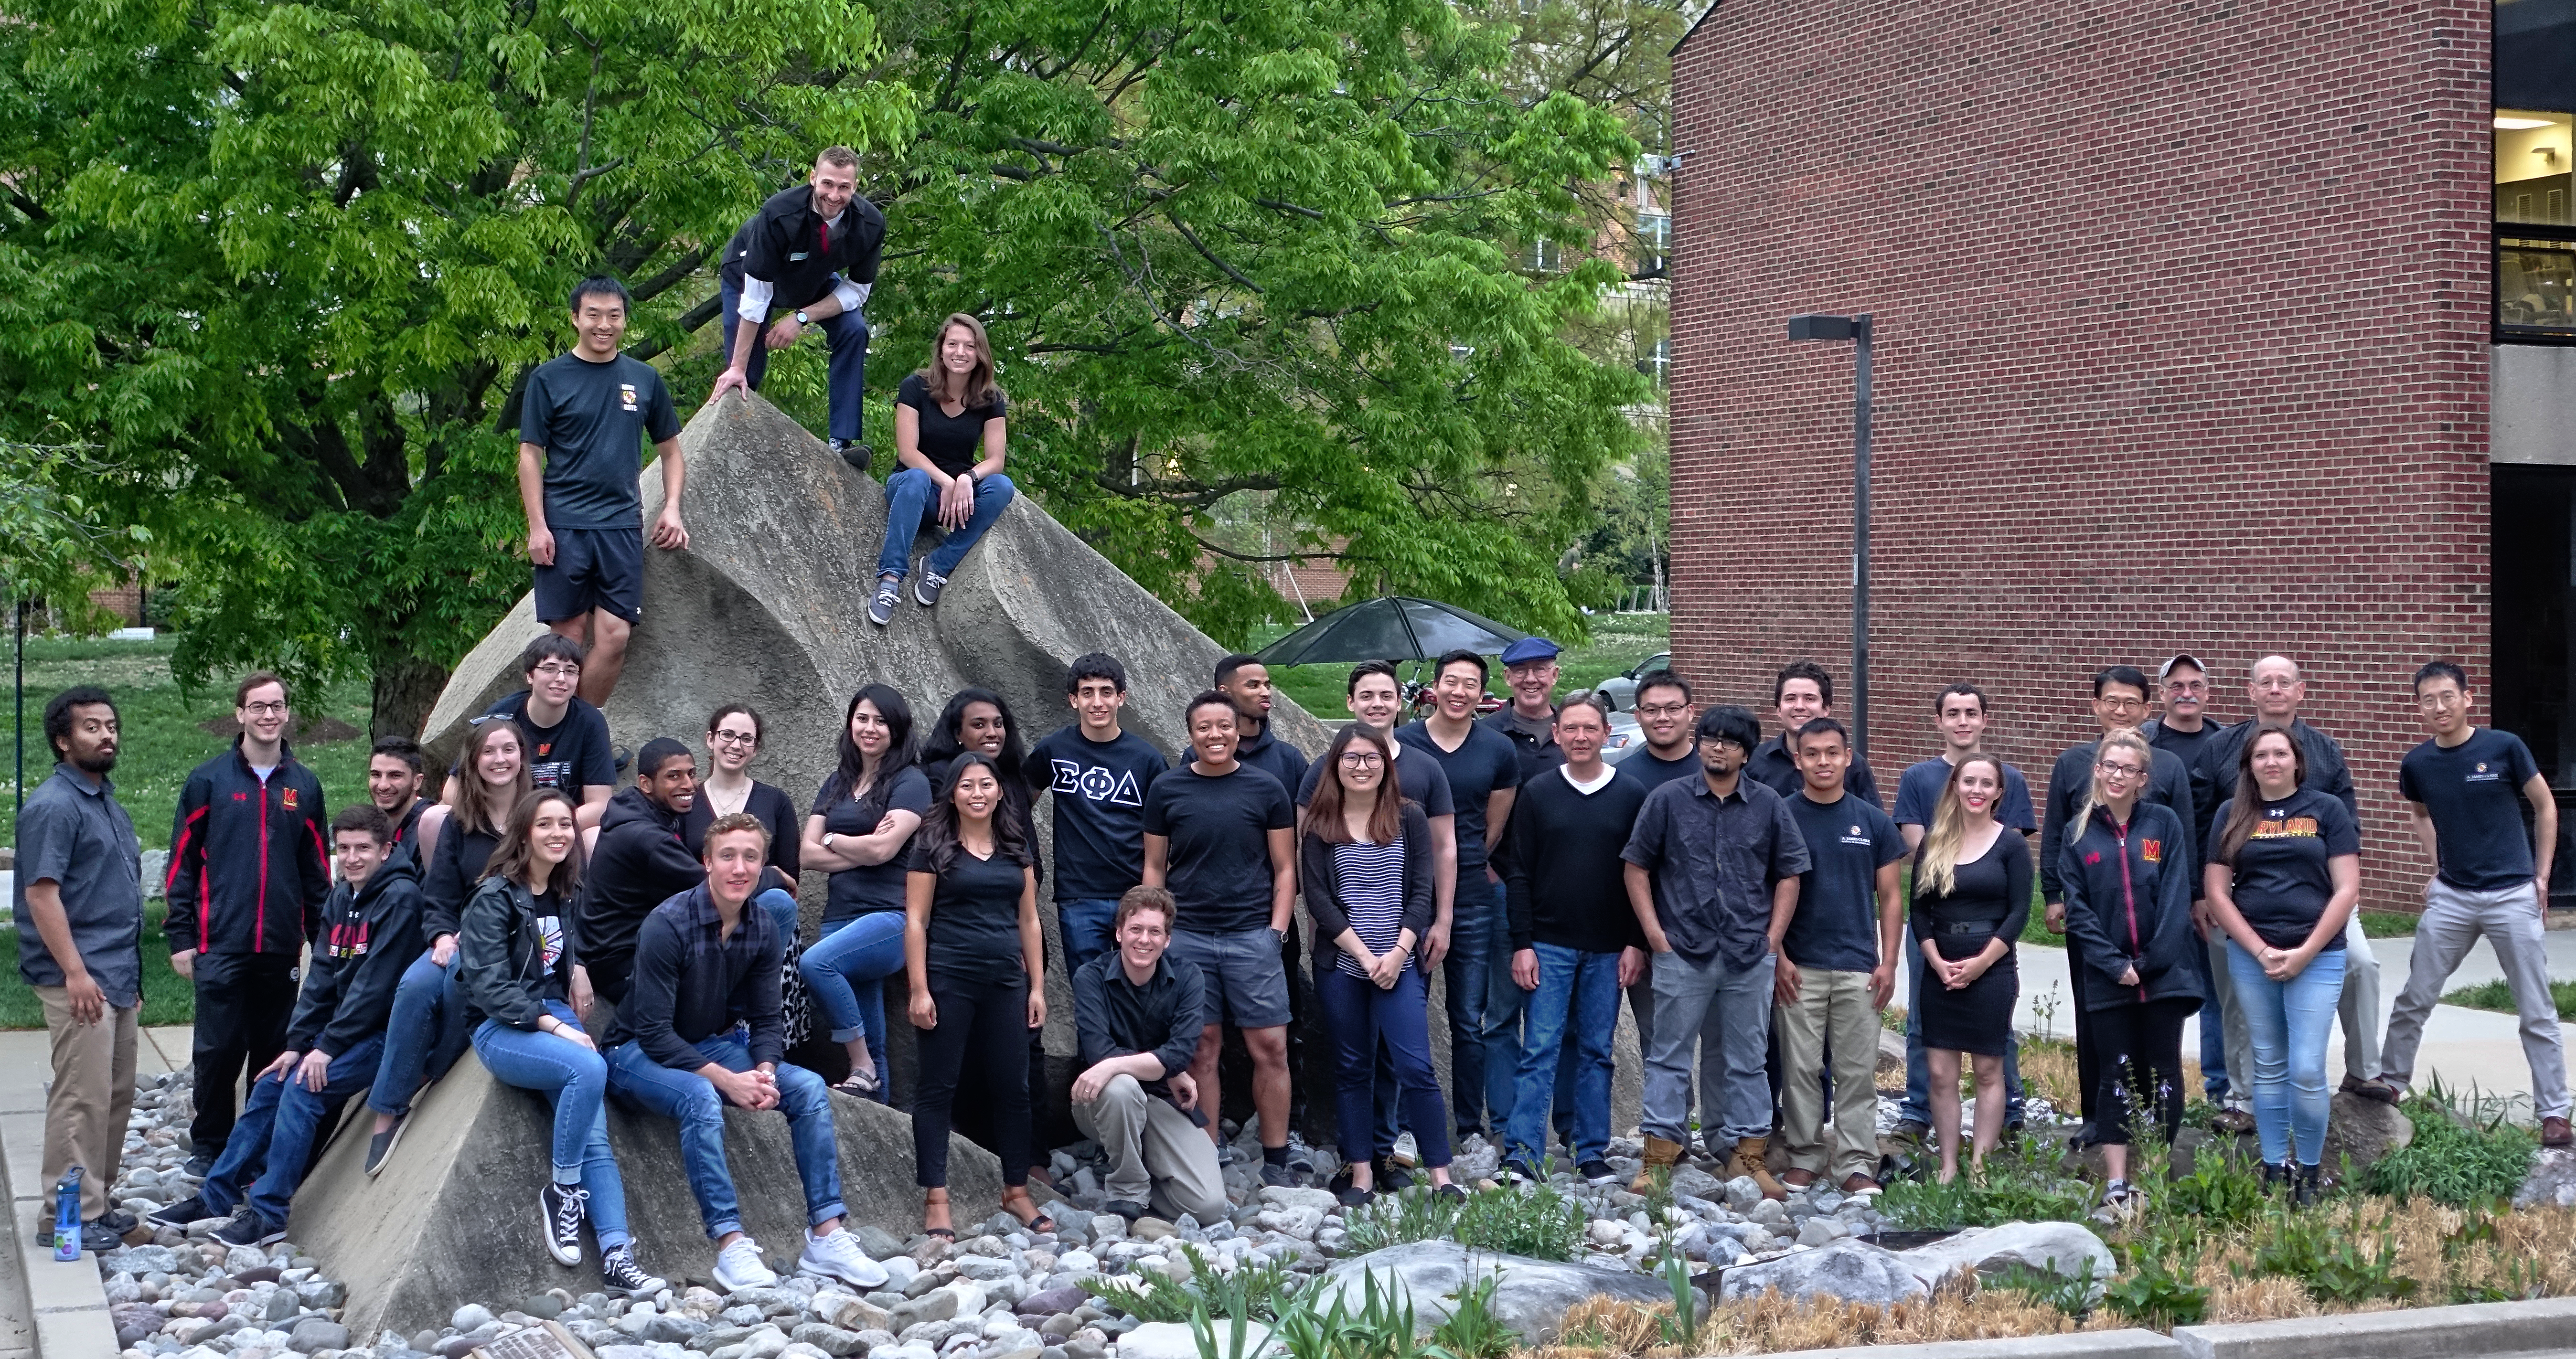 Group photo of the Maryland team members for Solar Decathlon 2017.